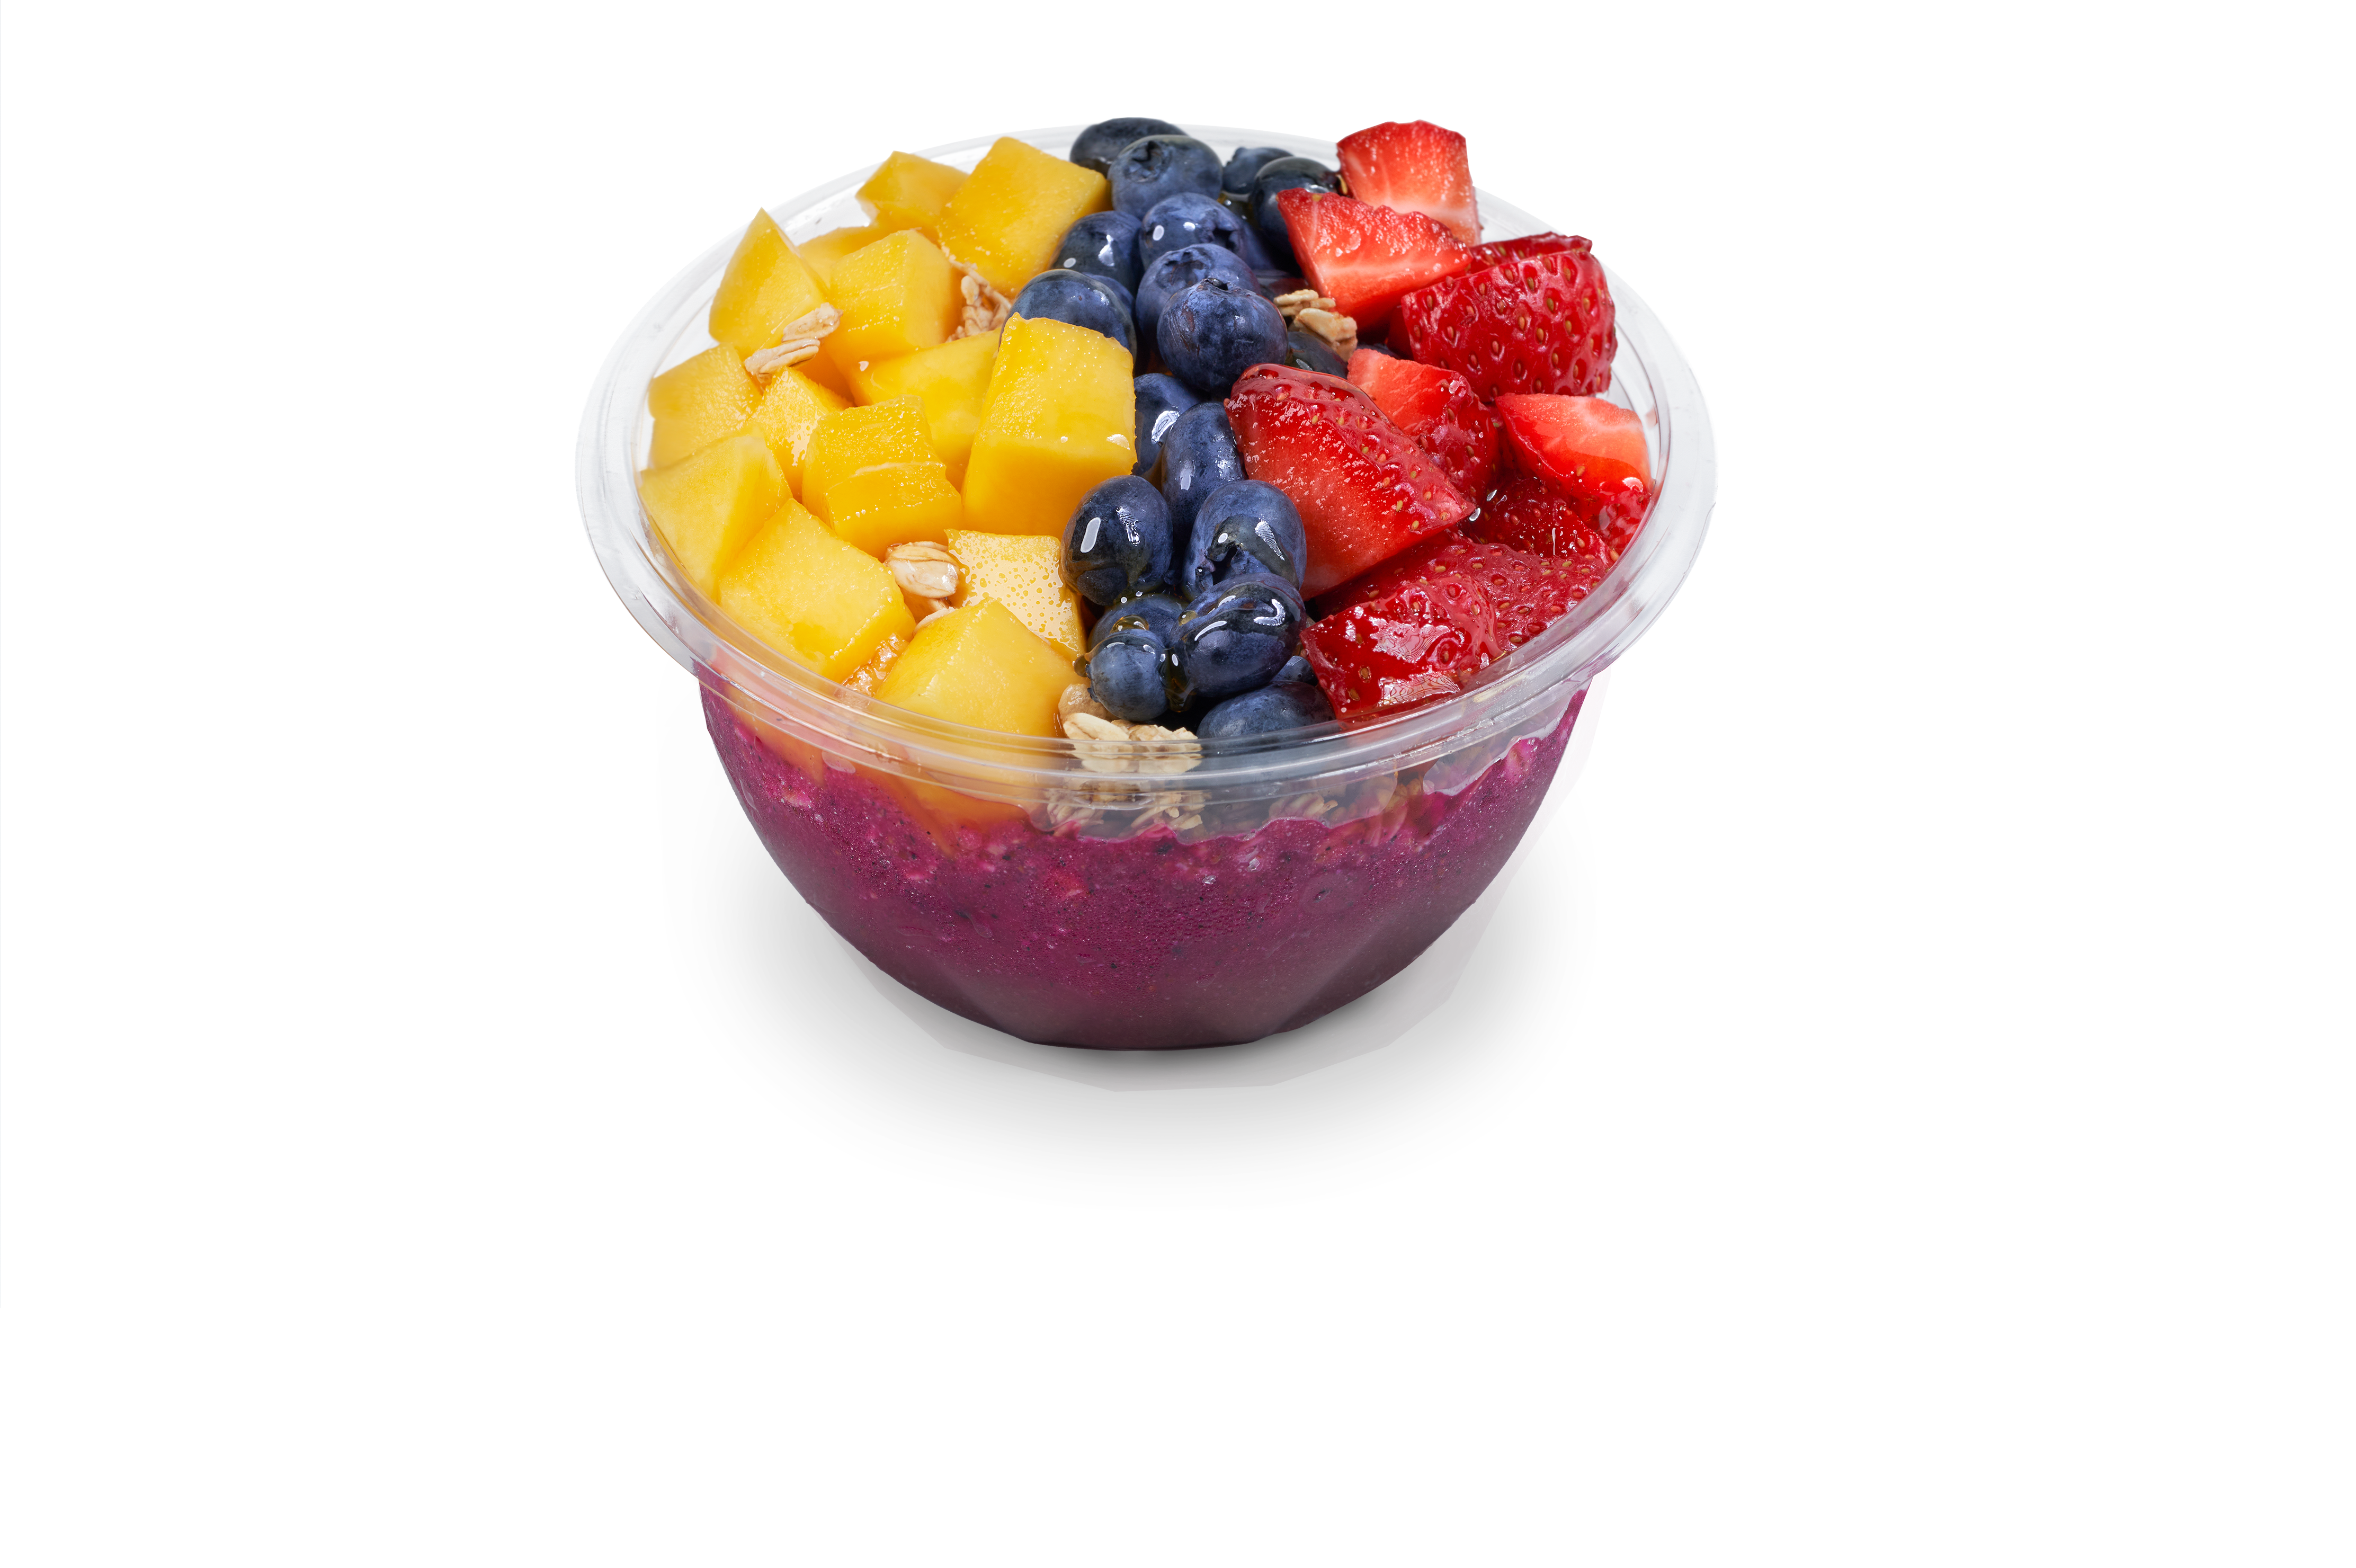 A fruit smoothie in a plastic cup offered by a smoothie franchise with berries and nuts.